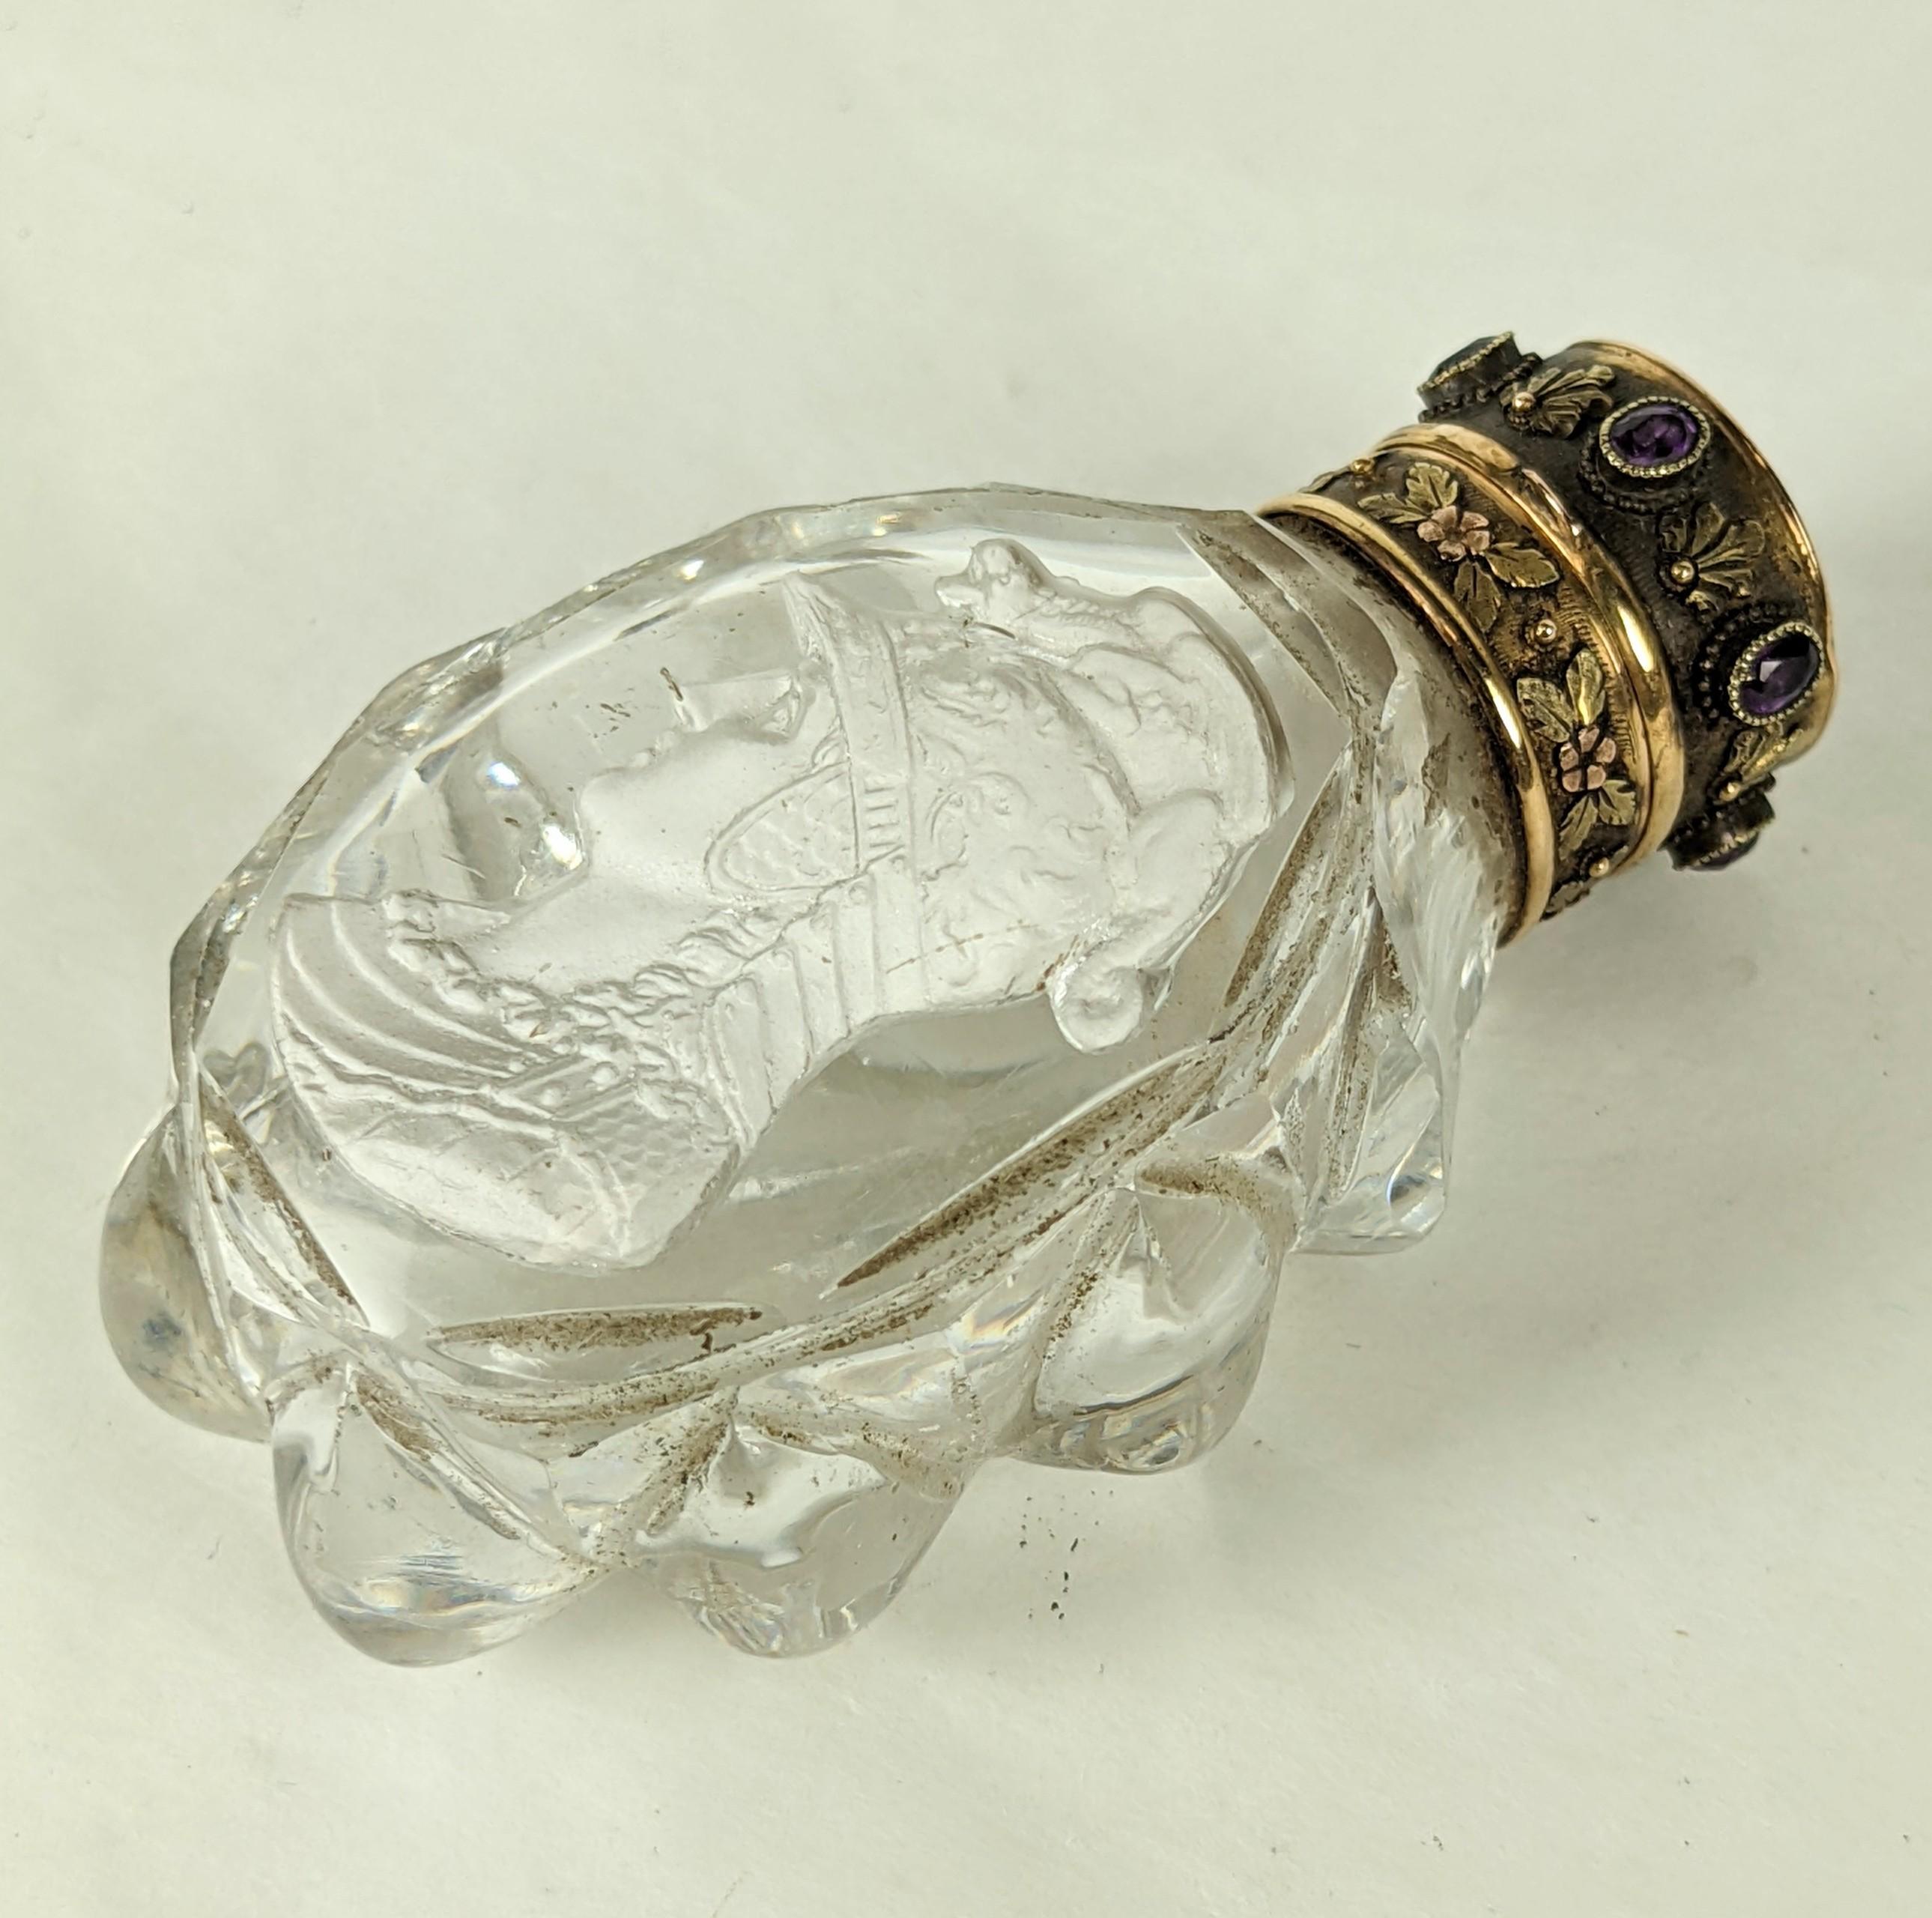 perfume bottle stand